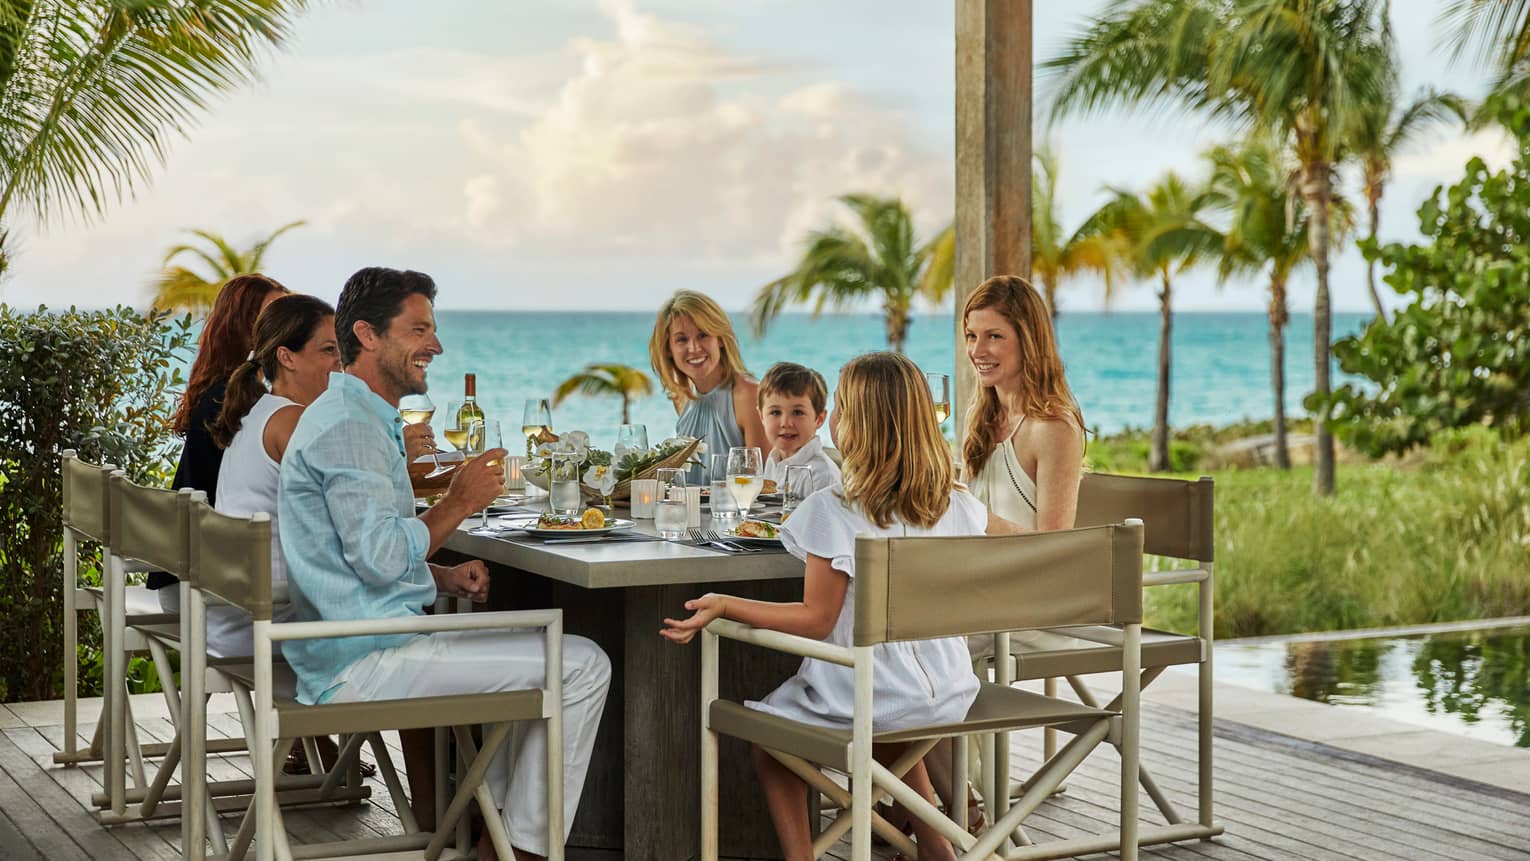 Smiling family dines around patio table, ocean views